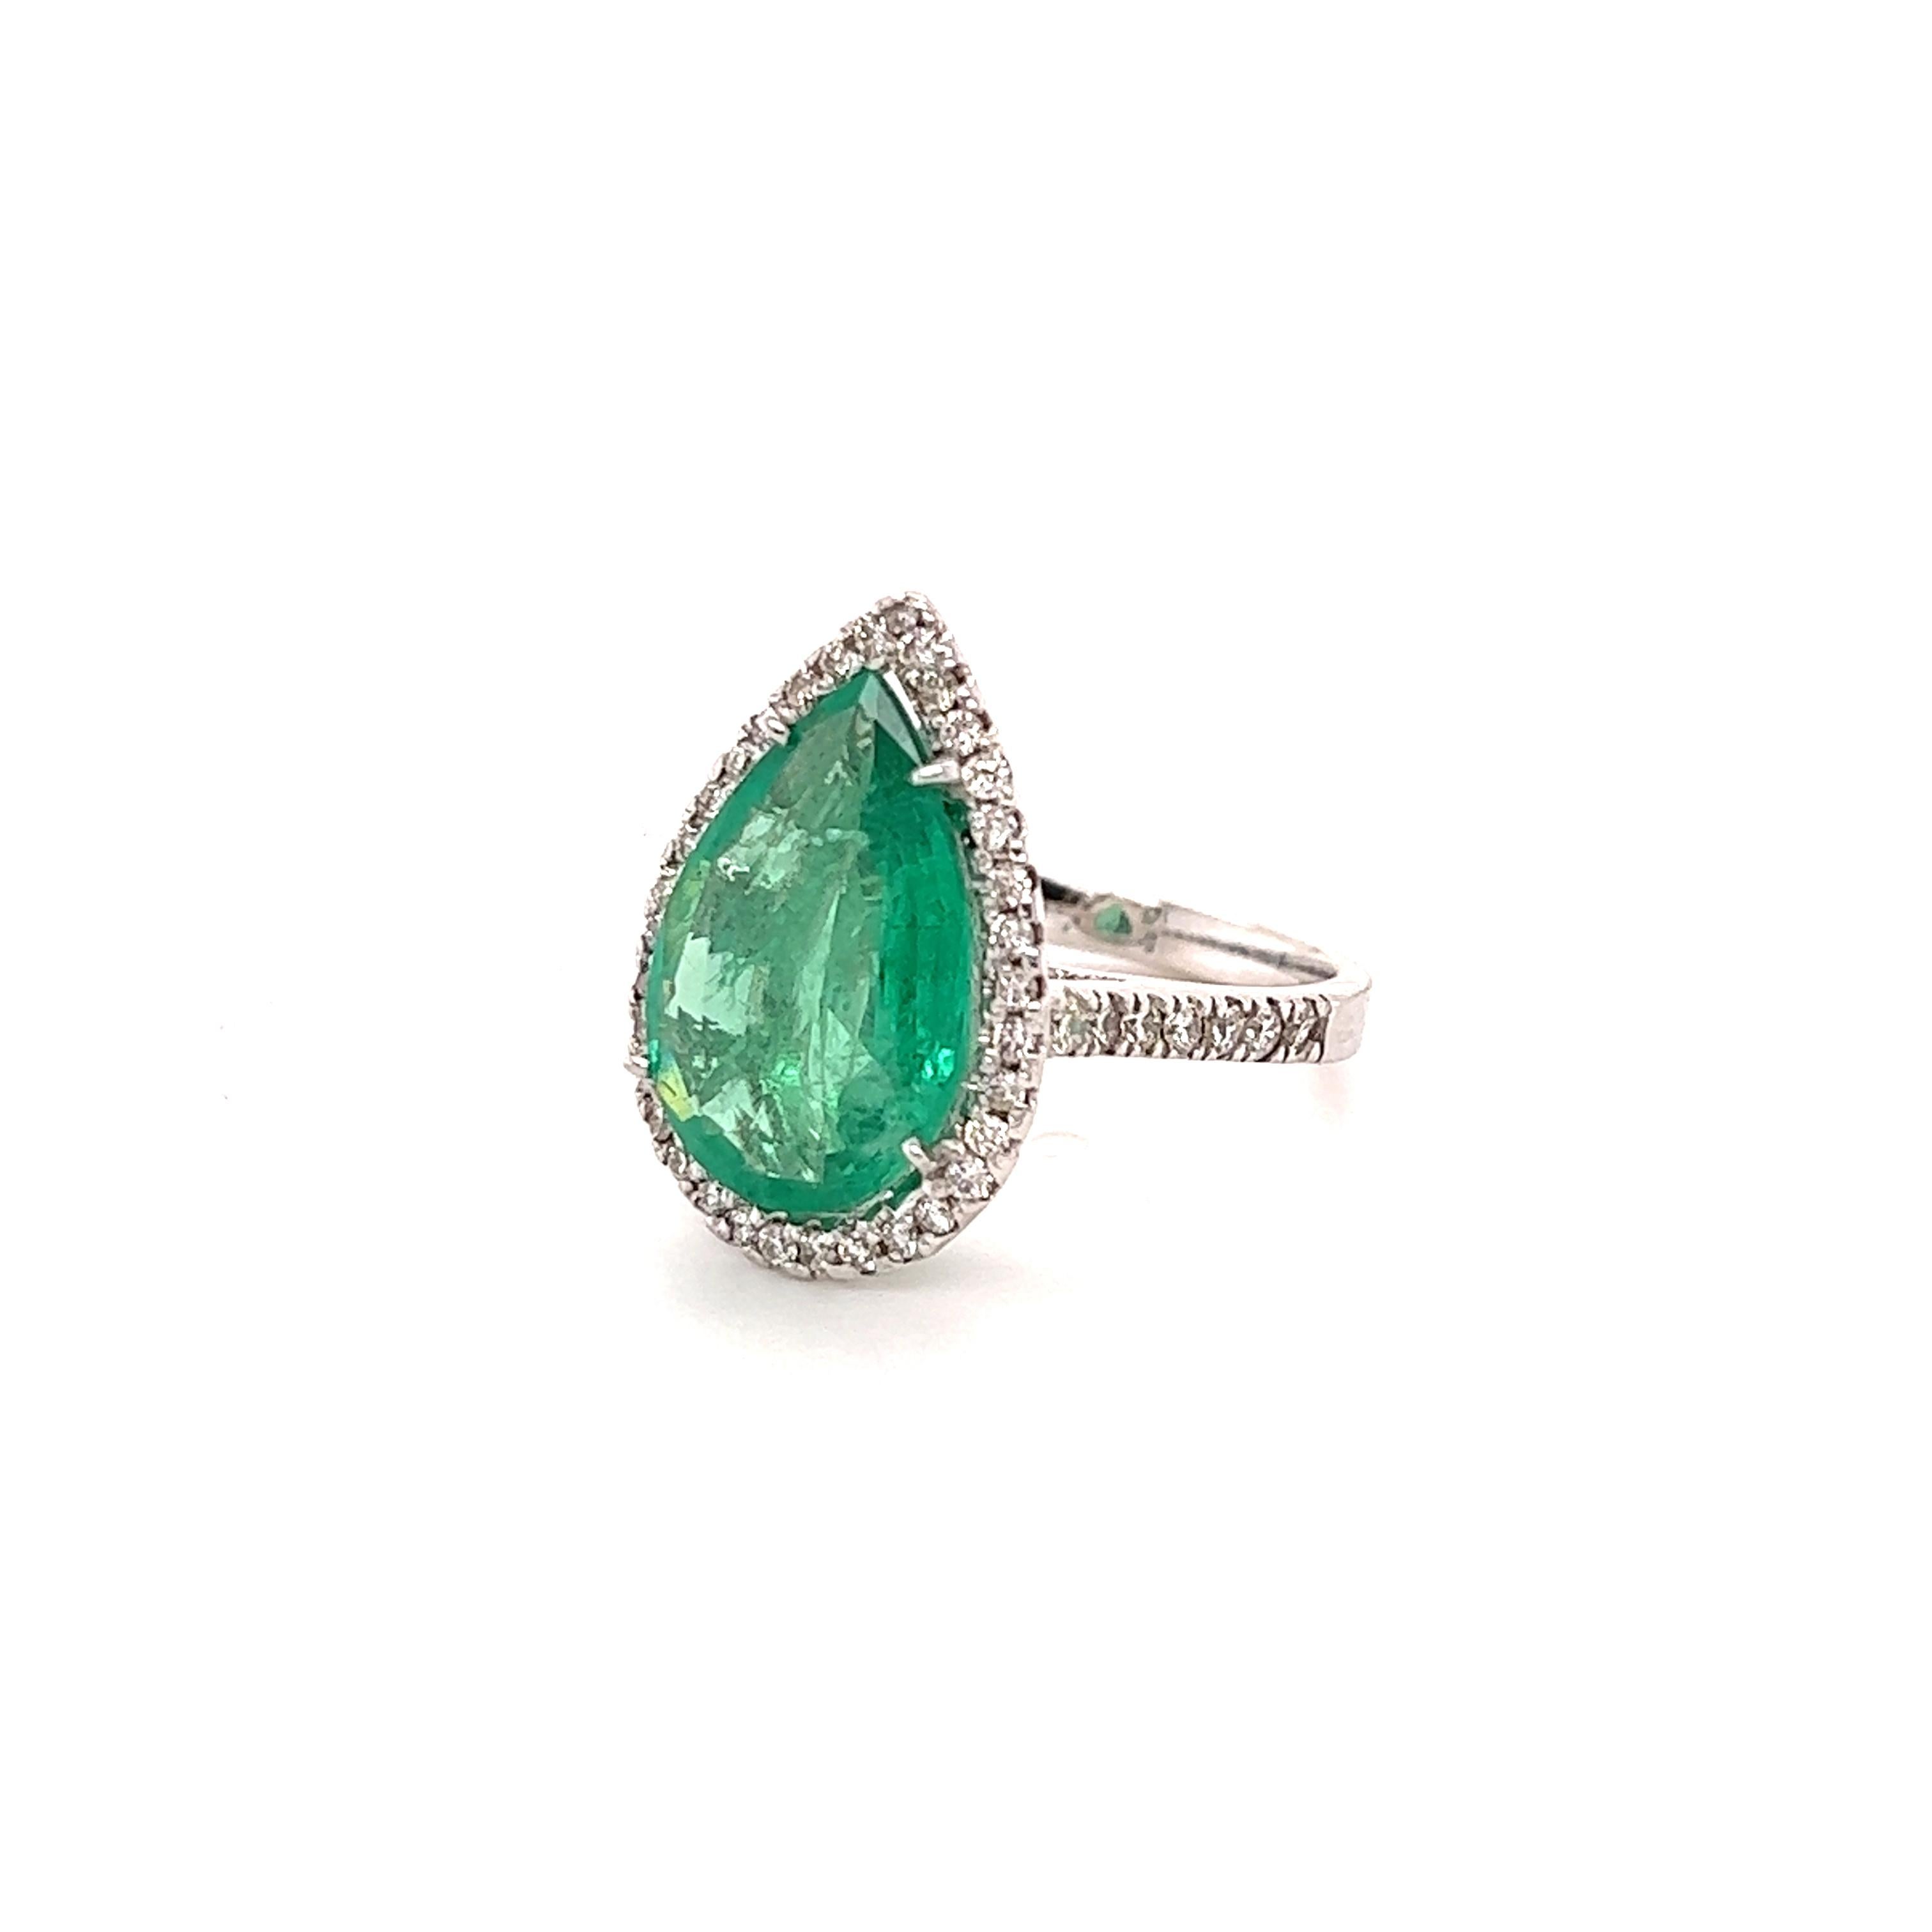 This ring has a Pear Cut Emerald that weighs 4.19 carats. It has 49 Round Cut Diamonds that weigh 0.64 carats. The total carat weight of this ring is 4.83 carats. 

The Pear Cut Emerald measures at 17 mm x 12 mm. The ring is also GIA certified. The